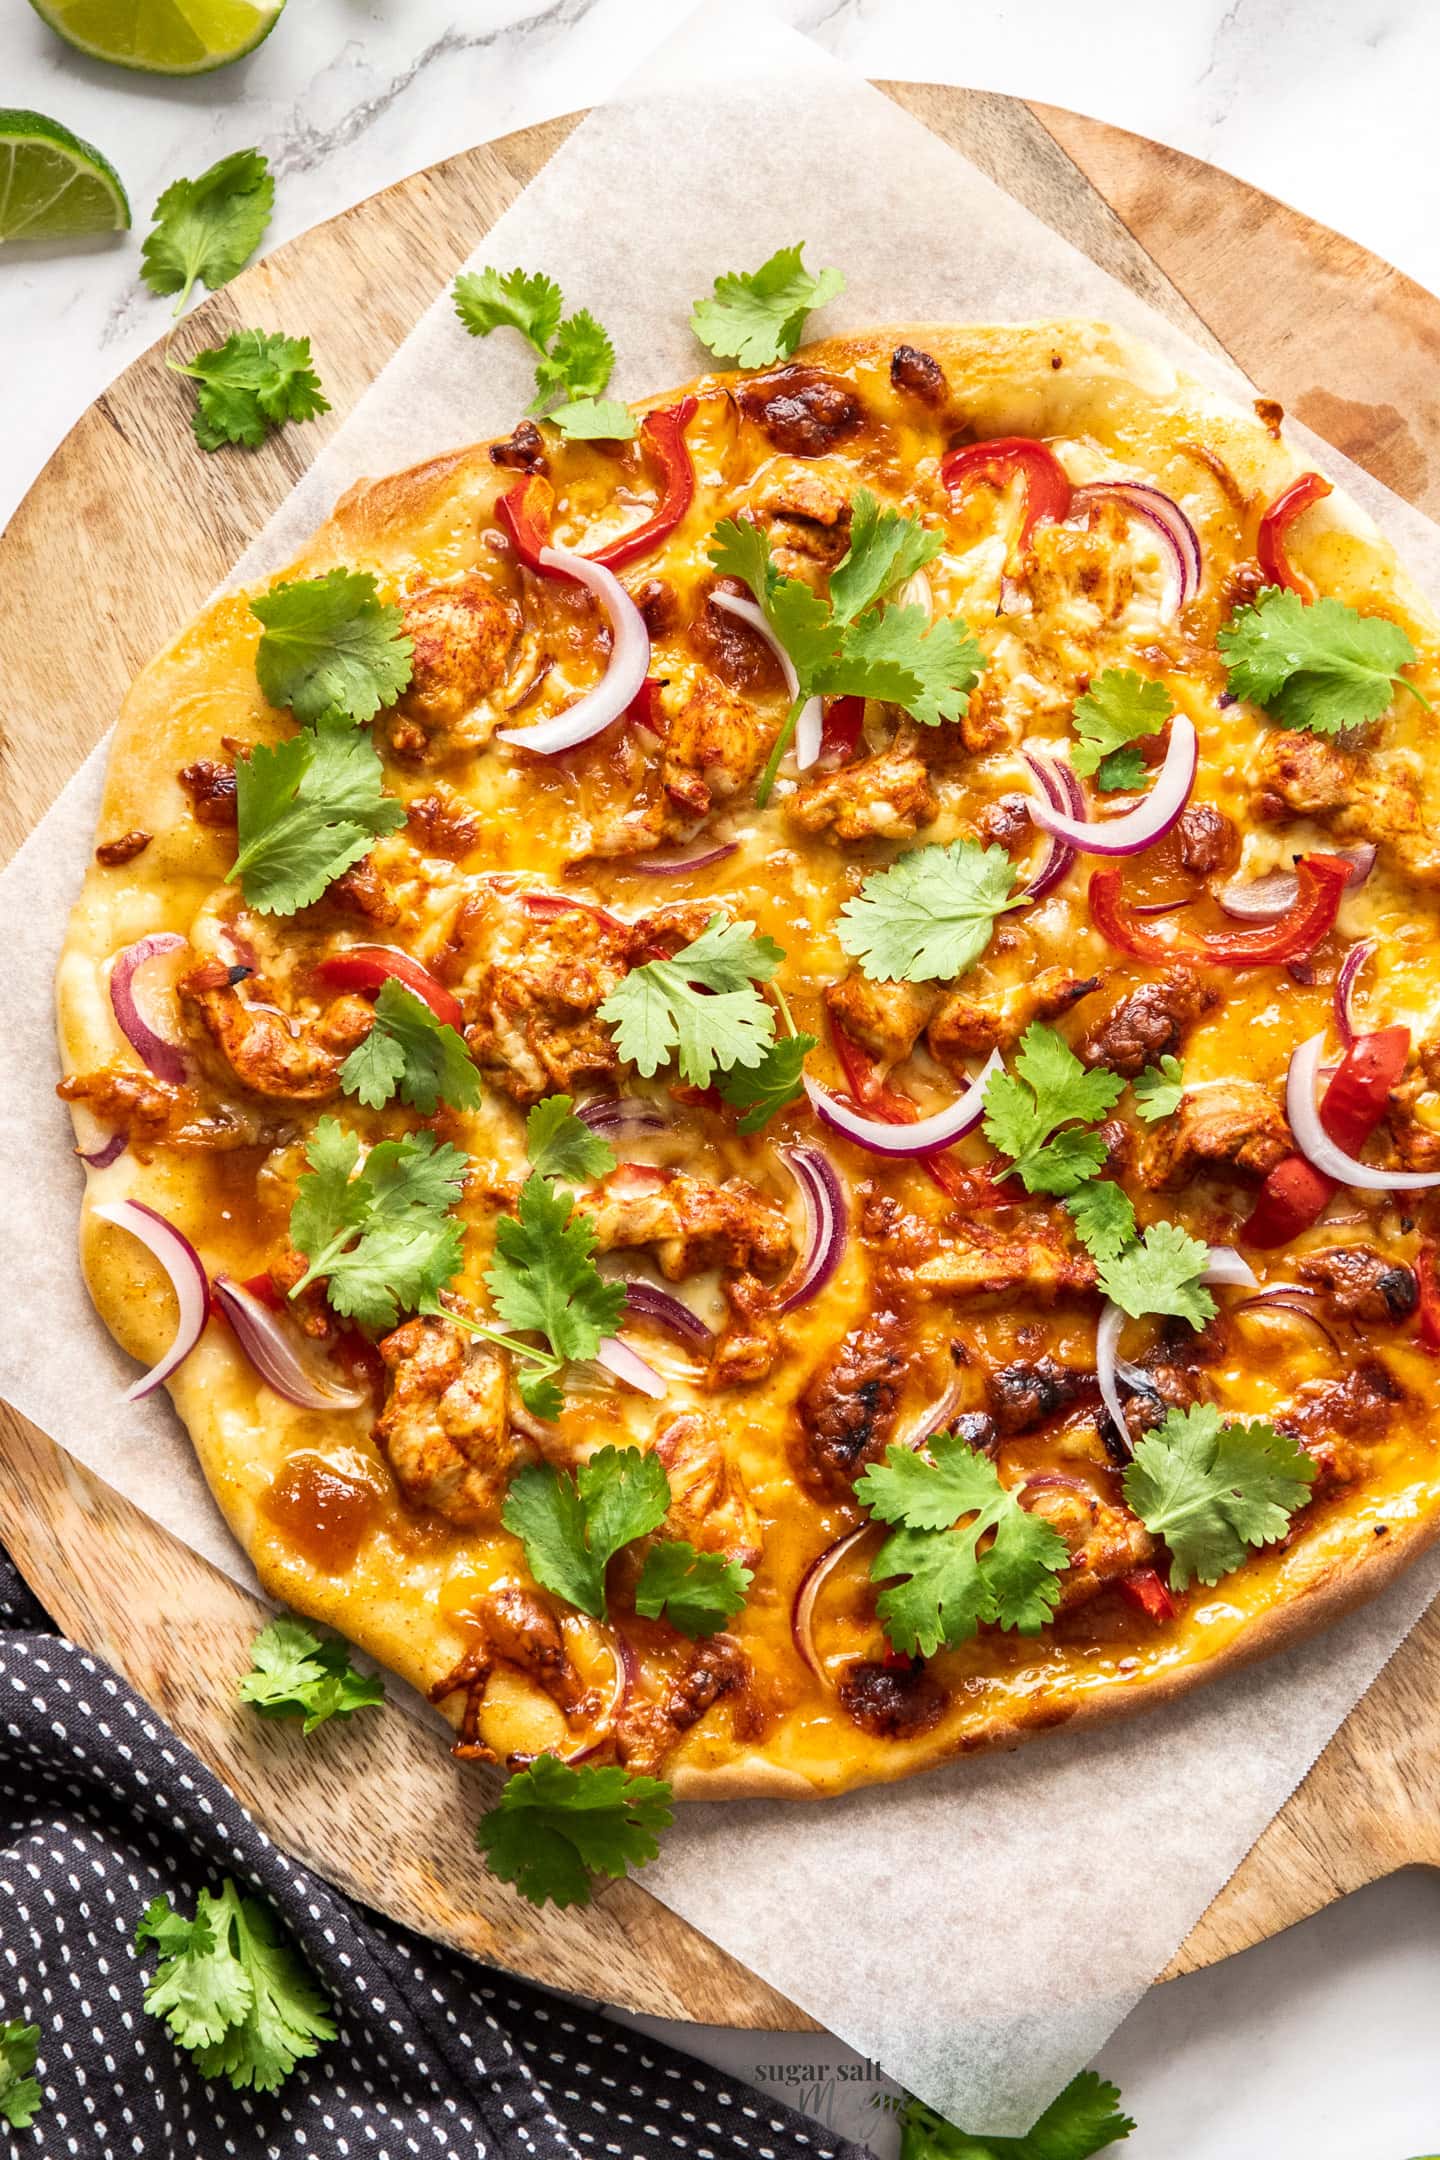 A whole tandoori chicken pizza on a wooden serving board.